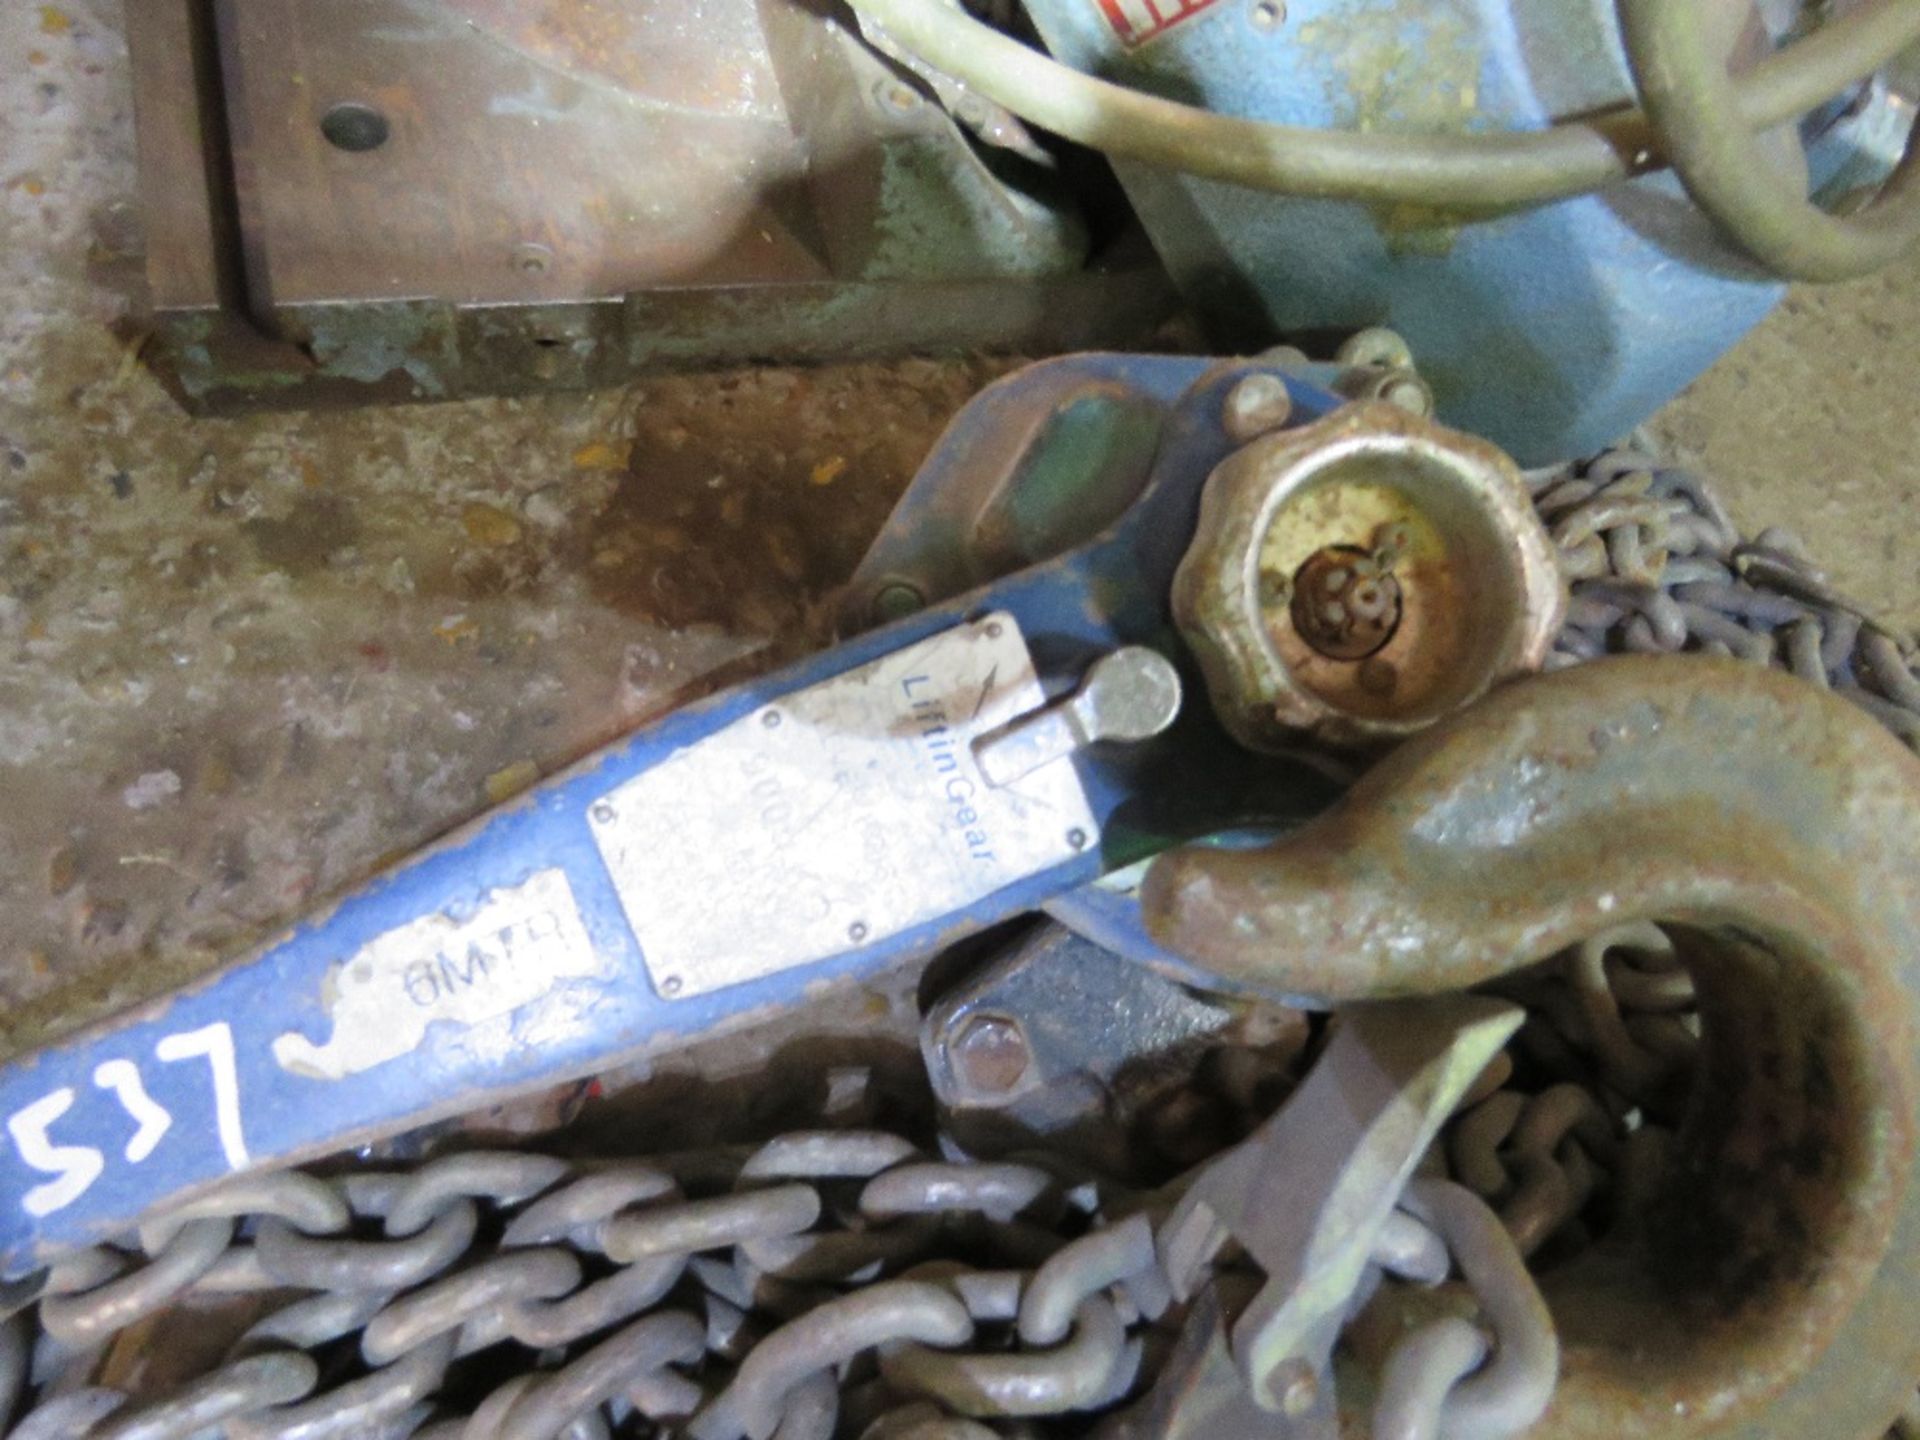 LIFTINGEAR 9000KG RATED RATCHET CHAIN HOIST/PULLER.. SOURCED FROM DEPOT CLEARANCE. - Image 2 of 3